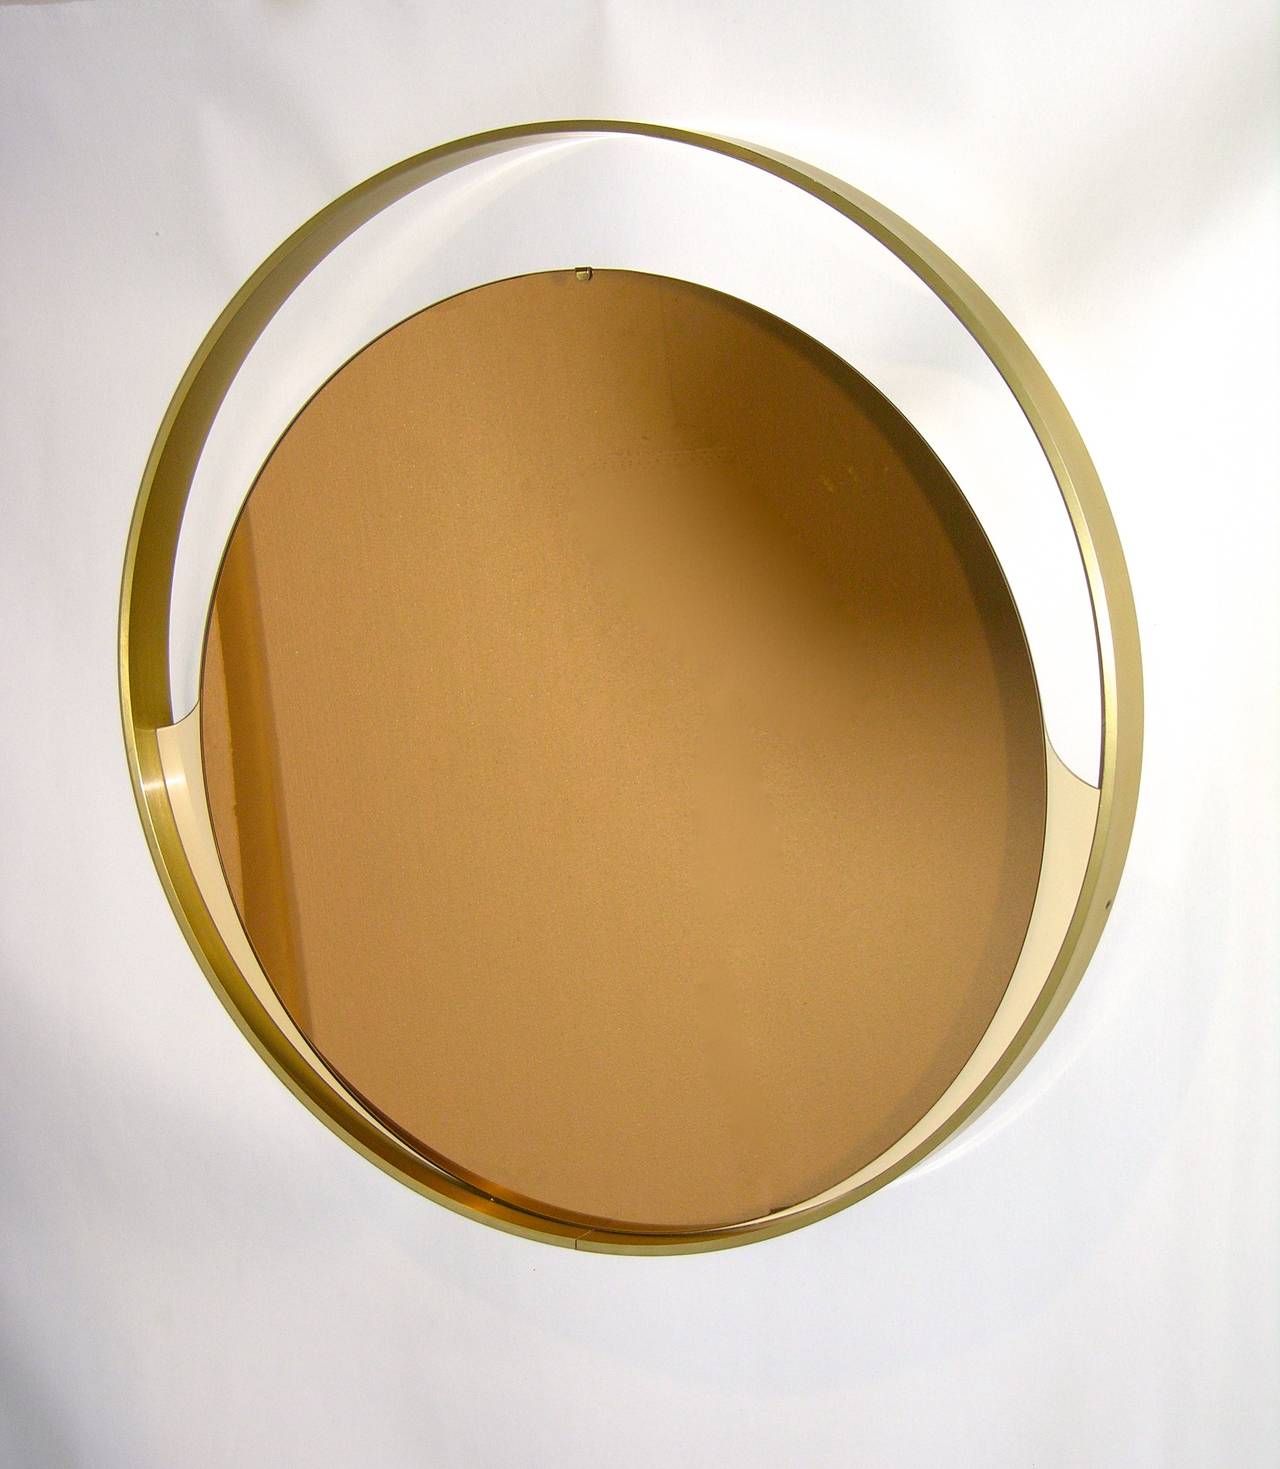 A very rare round mirror by the Italian Company Rimadesio, founded in Desio in 1956. Immediately renowned for innovation in glass techniques, combining architectural accents in the design with style and functionality, the company specializes in